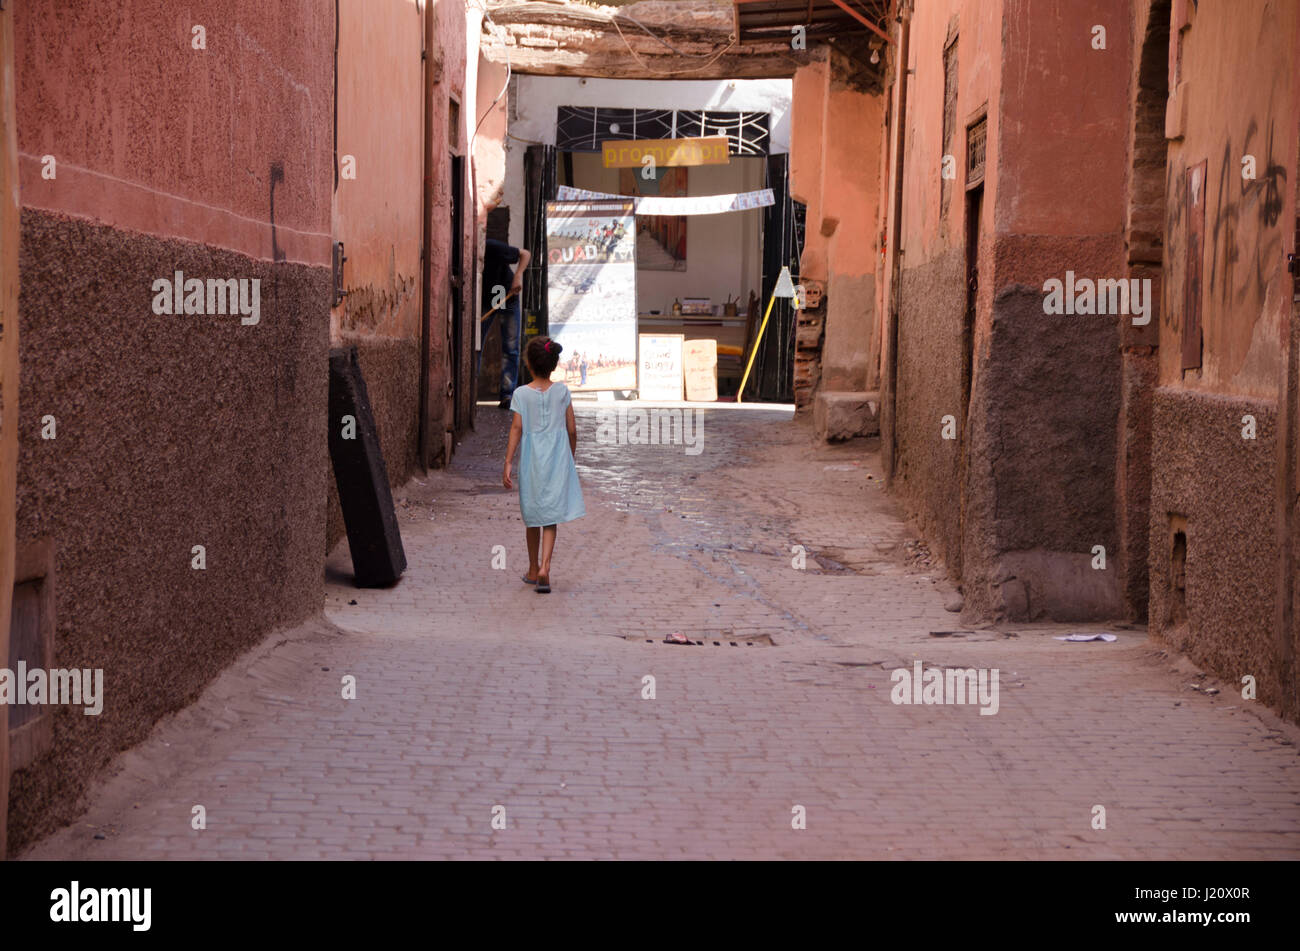 Lifestyle in the streets of Marrakech Stock Photo